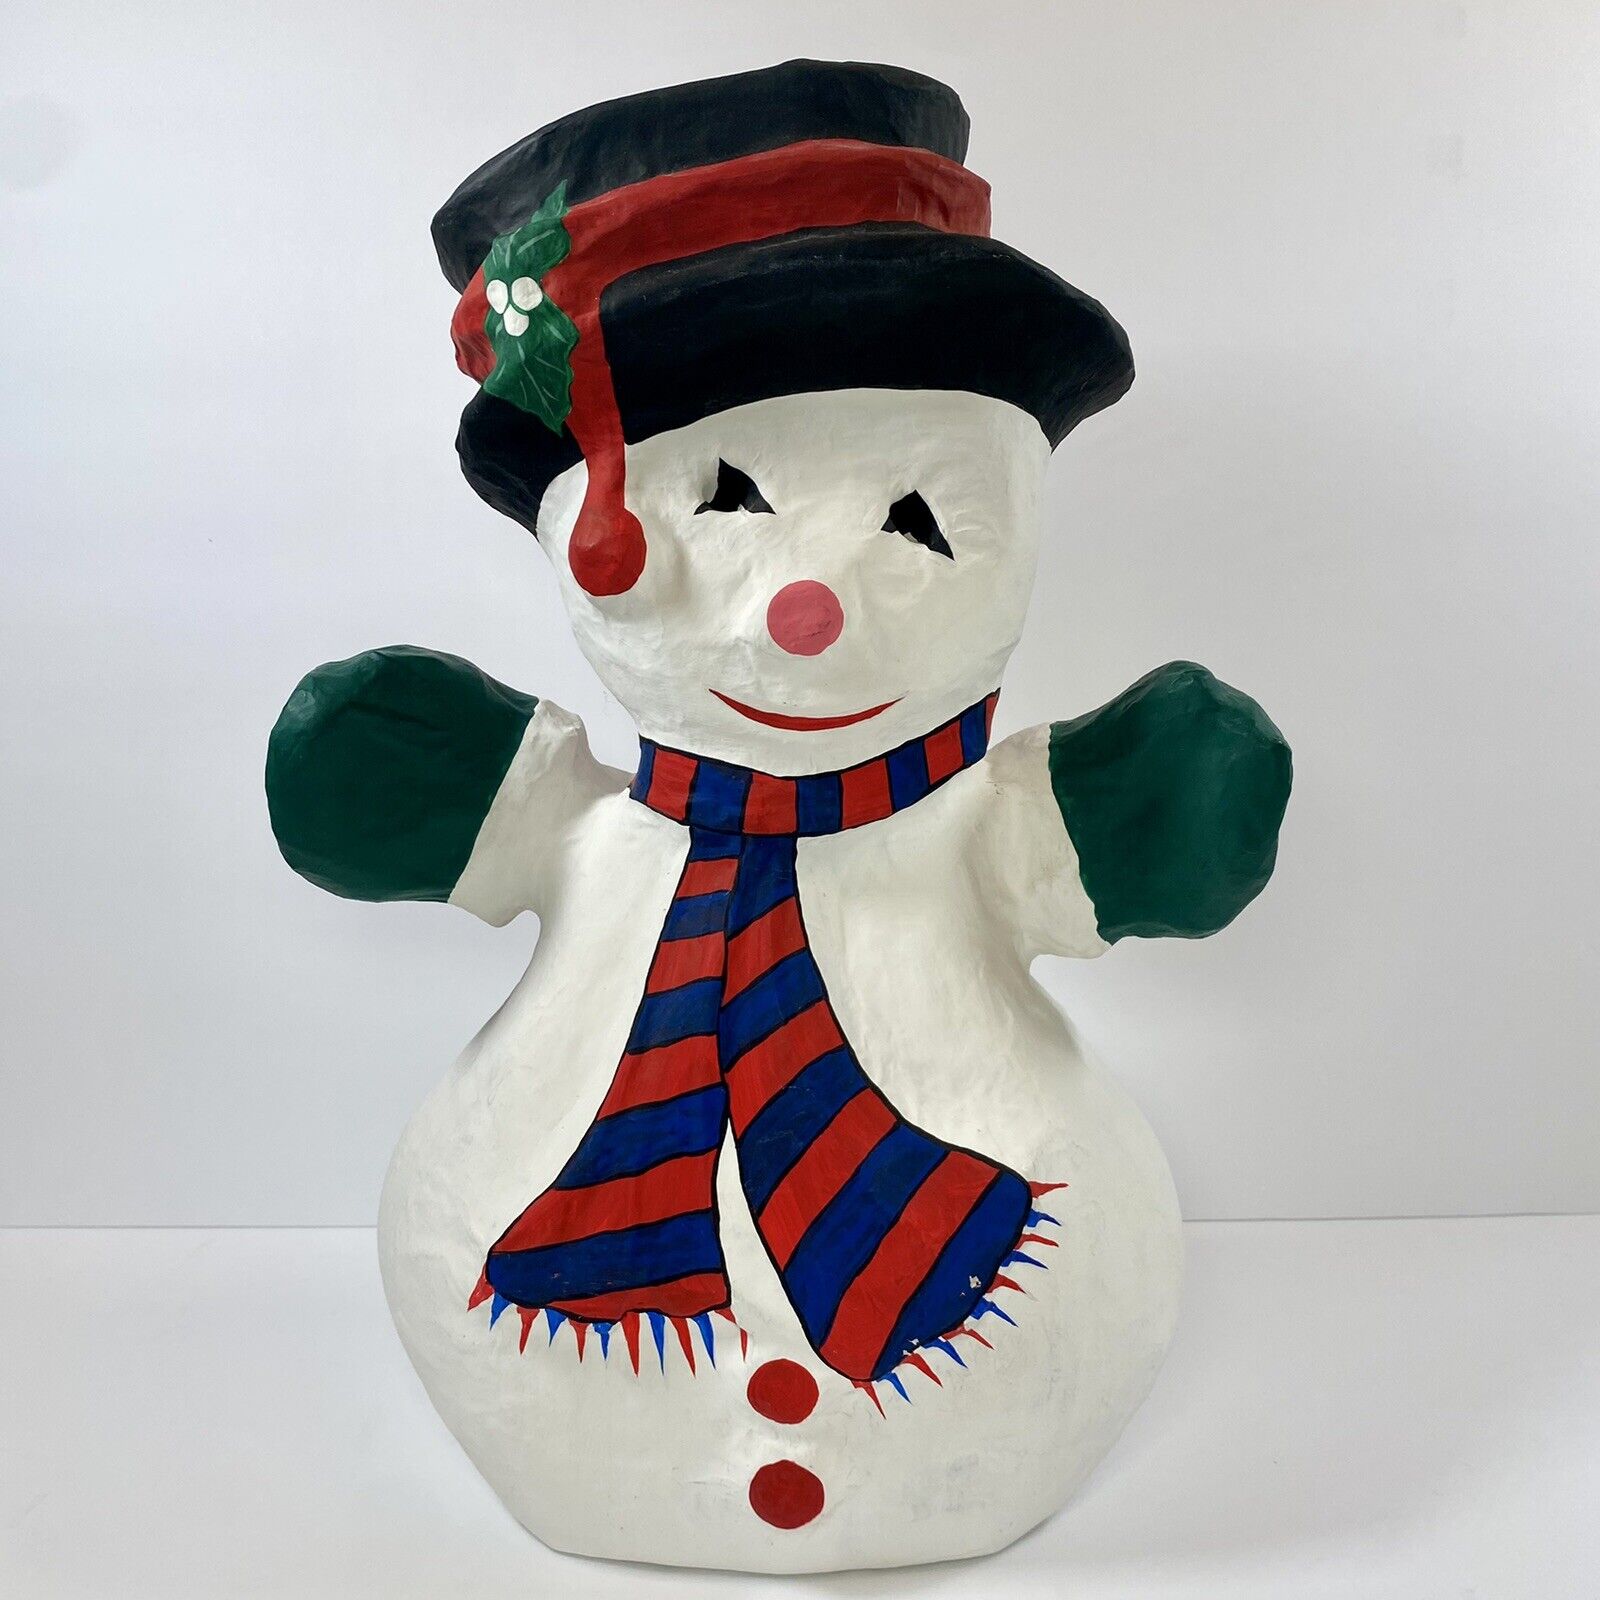 Paper Mache Snowman Hand Painted Christmas 14” Bethany Lowe? Dept 56? RARE VTG